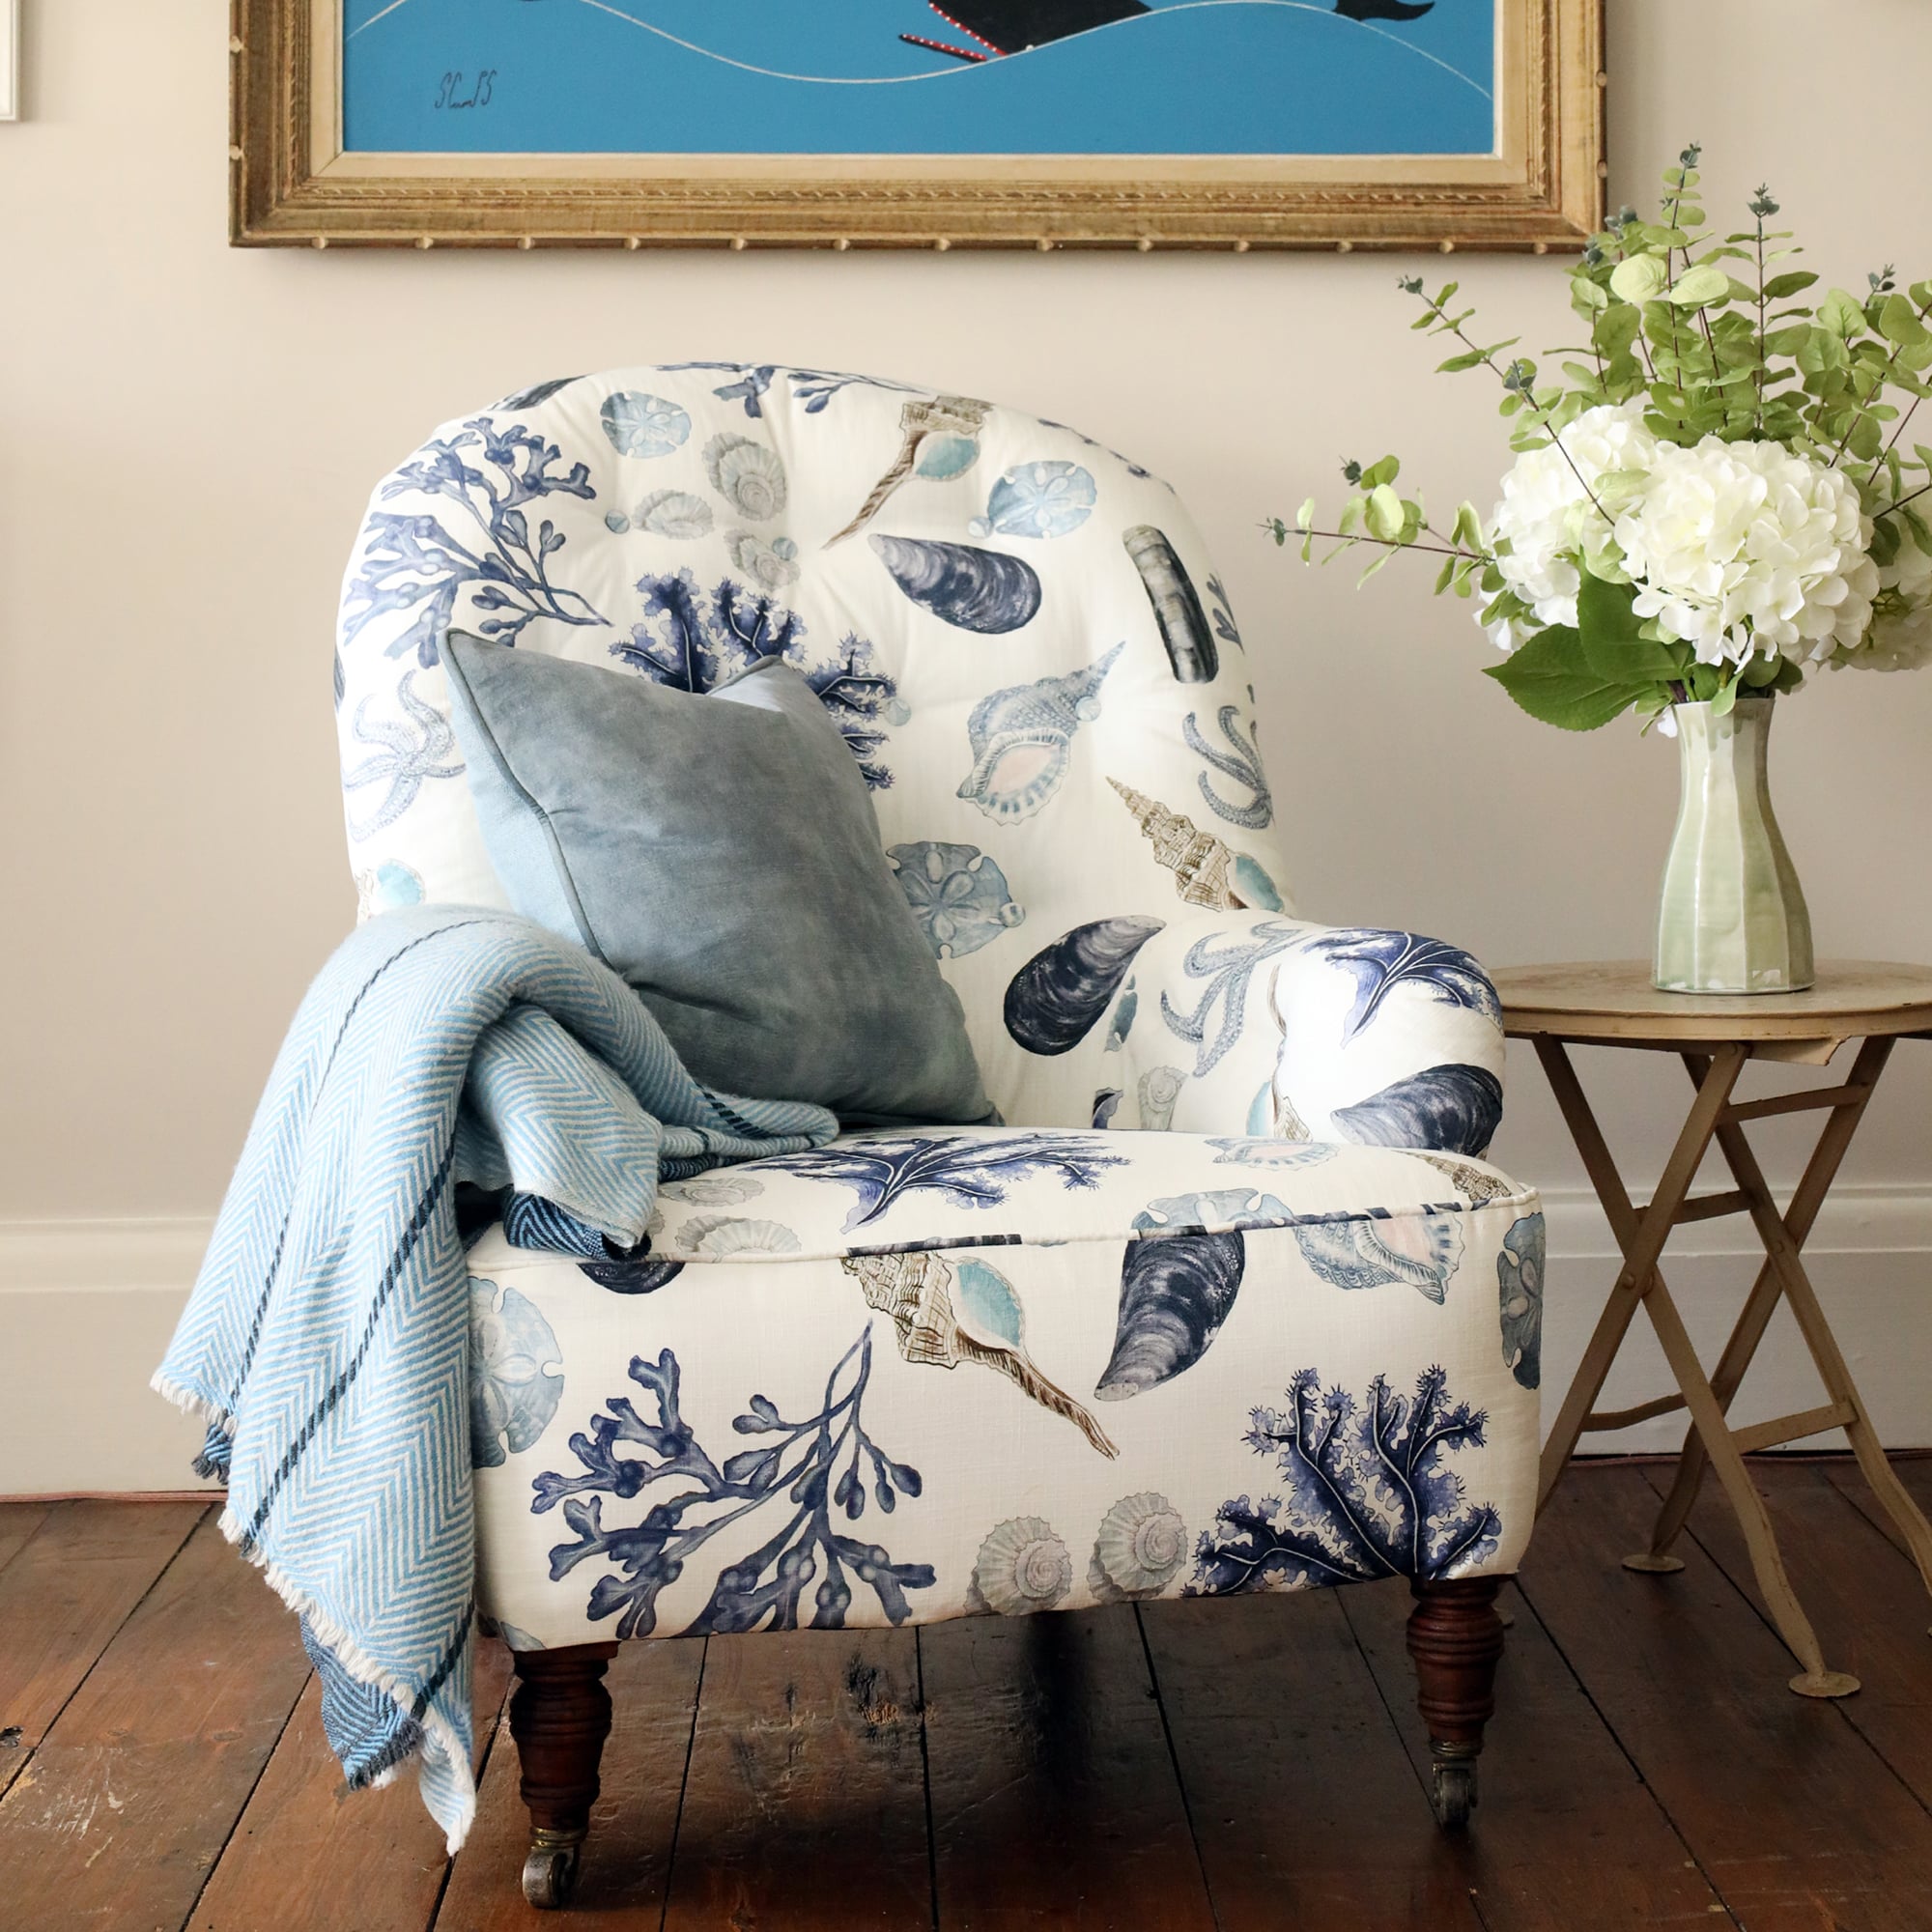 Off White Rockpool Buttoned Back Victorian Armchair